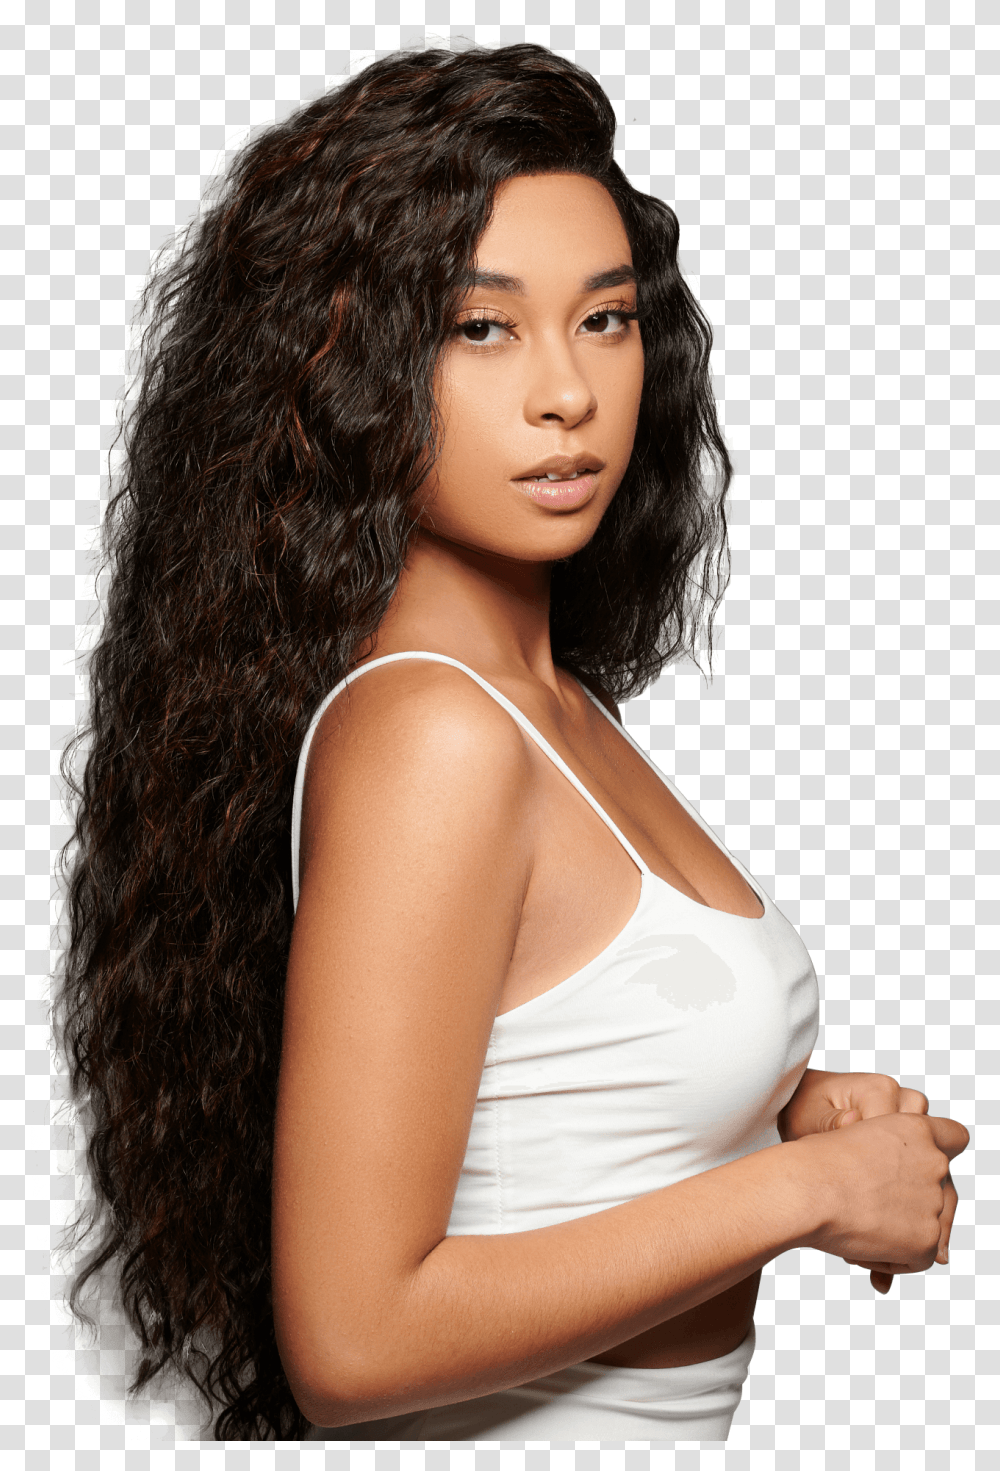 Lace Wig, Hair, Person, Human, Black Hair Transparent Png